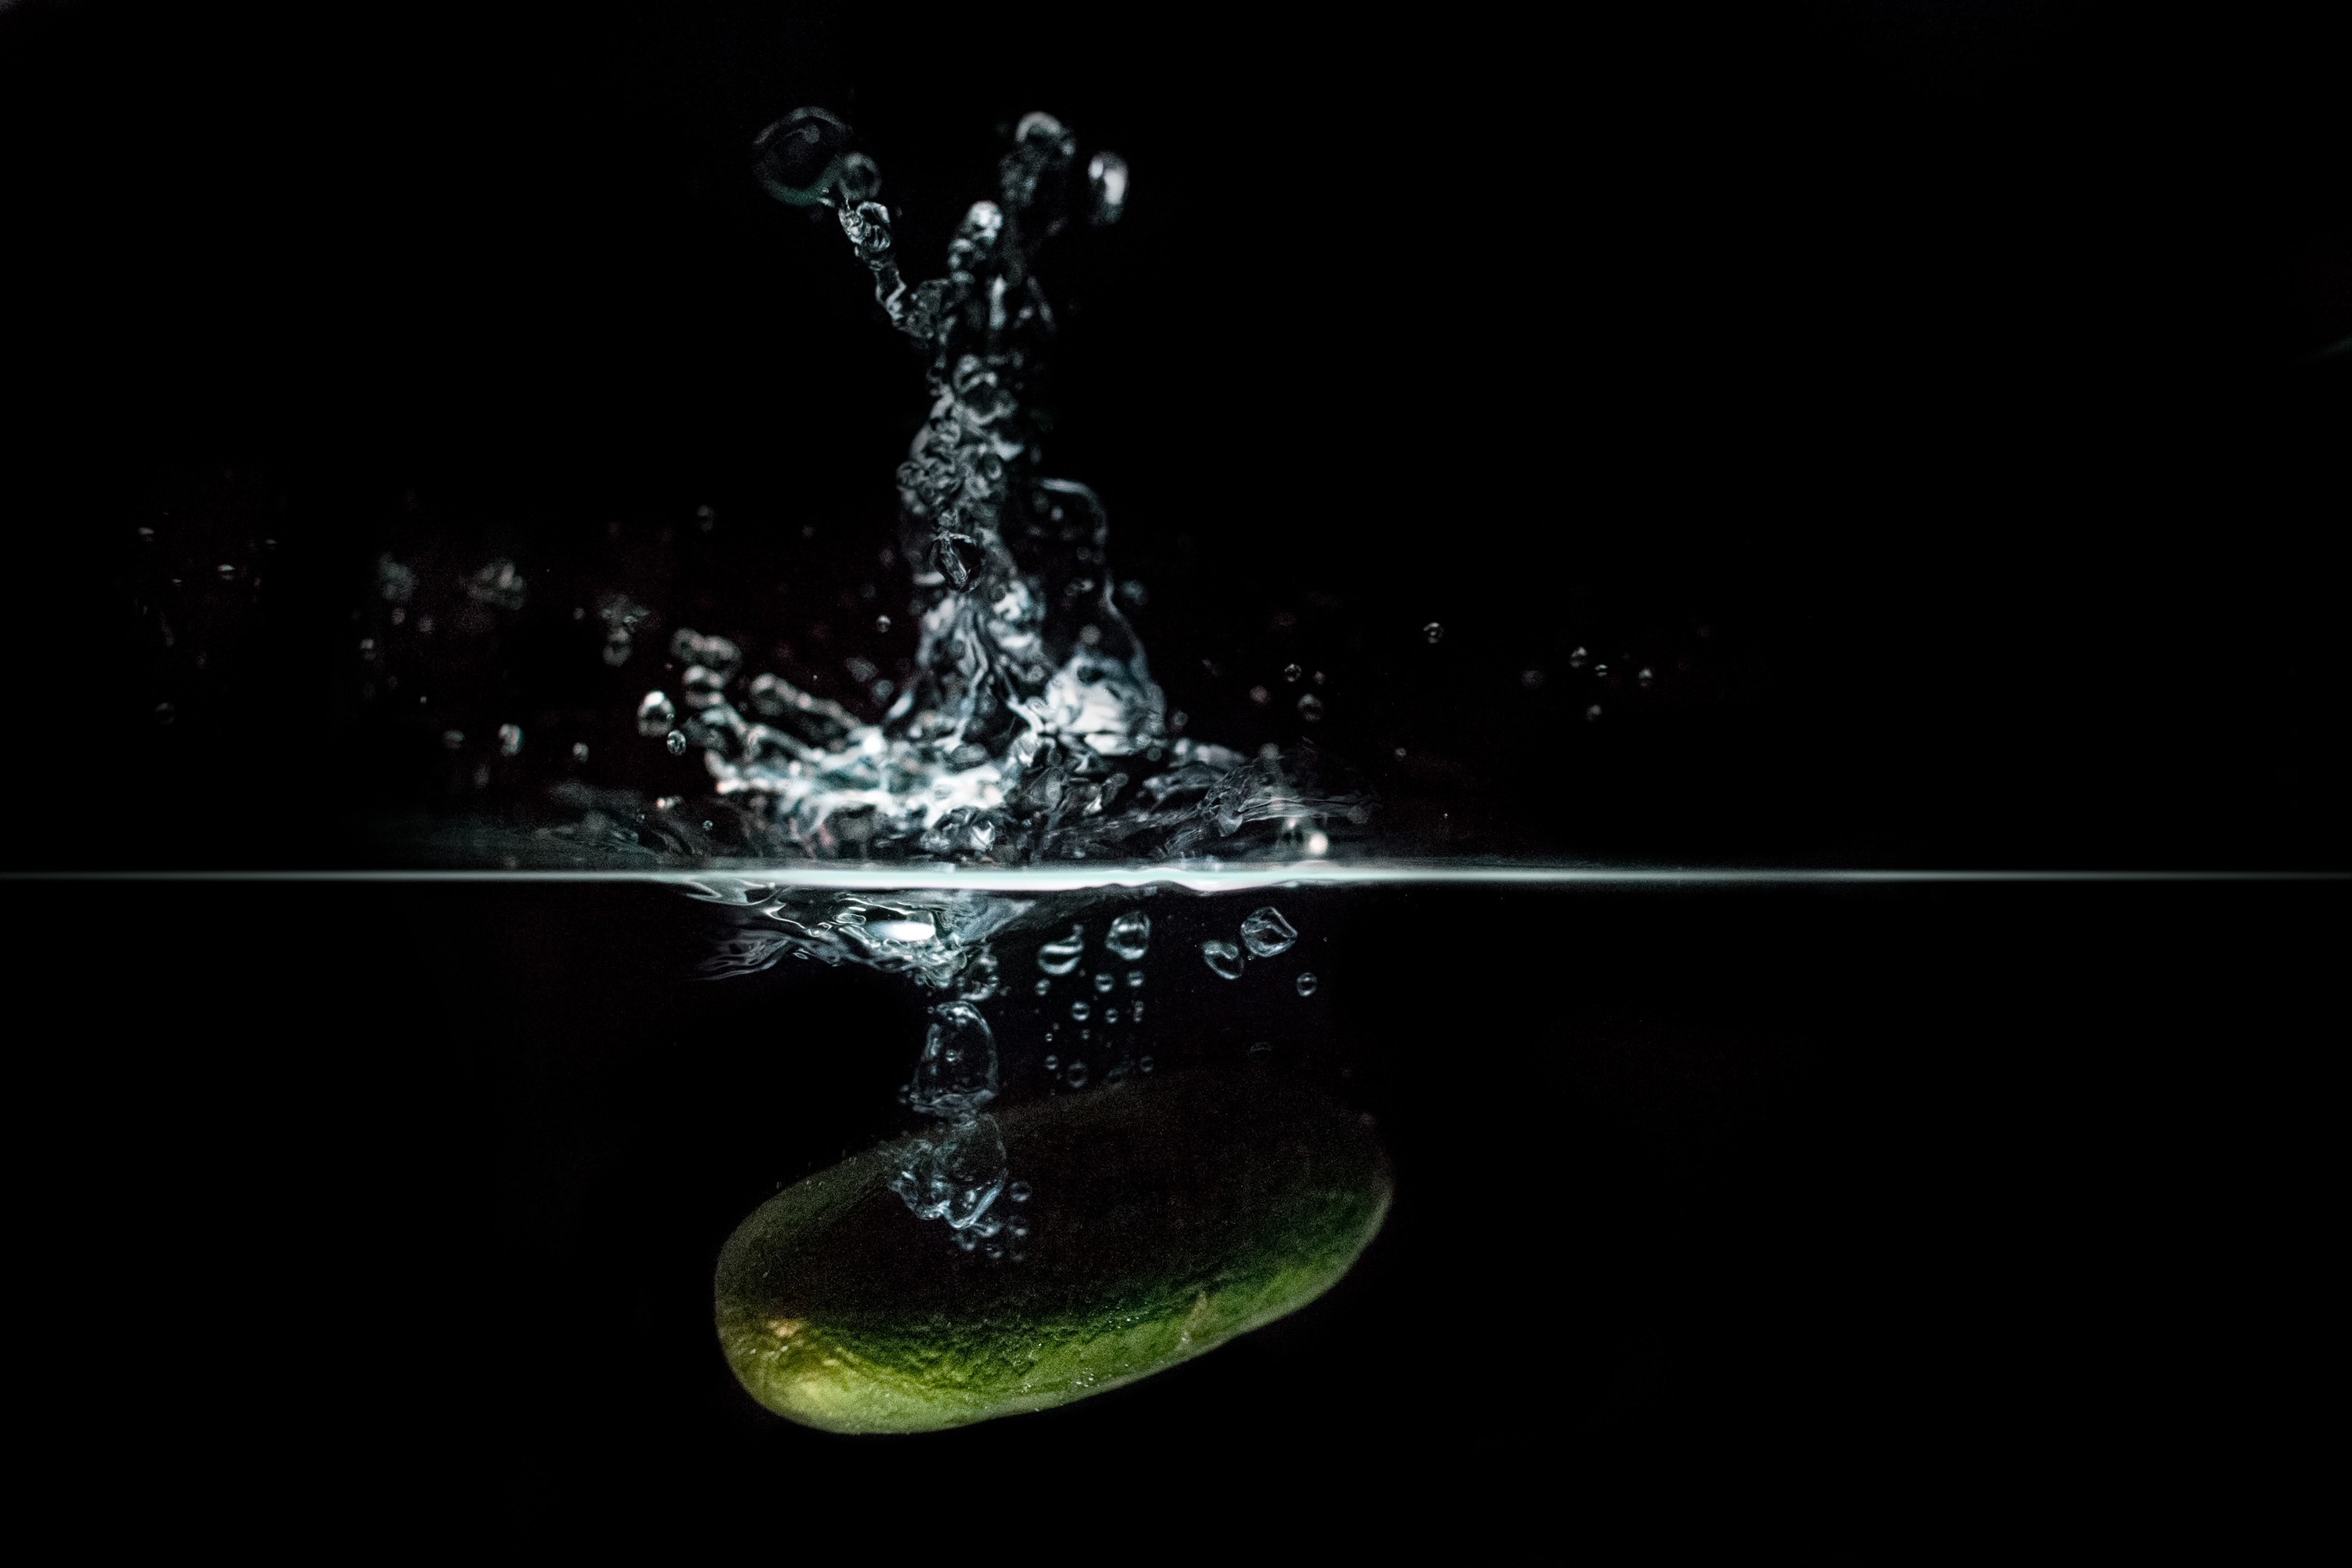 Focus Photo of Green Vegetable Dropped on Water, Black background, Bubbles, Clean, Clear, HQ Photo